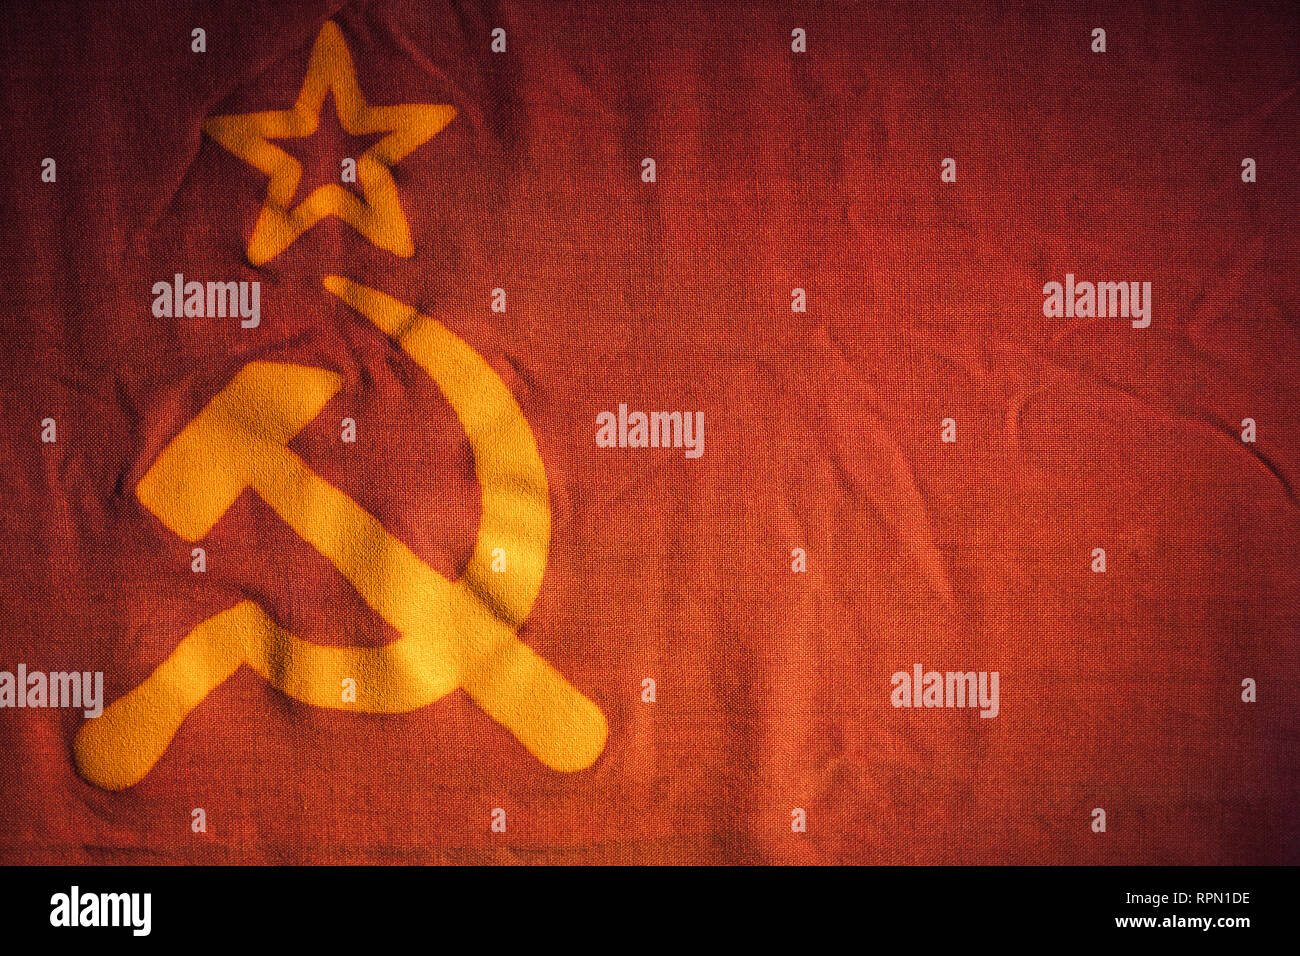 Soviet Union flag fragment with star, hammer and sickle Stock Photo